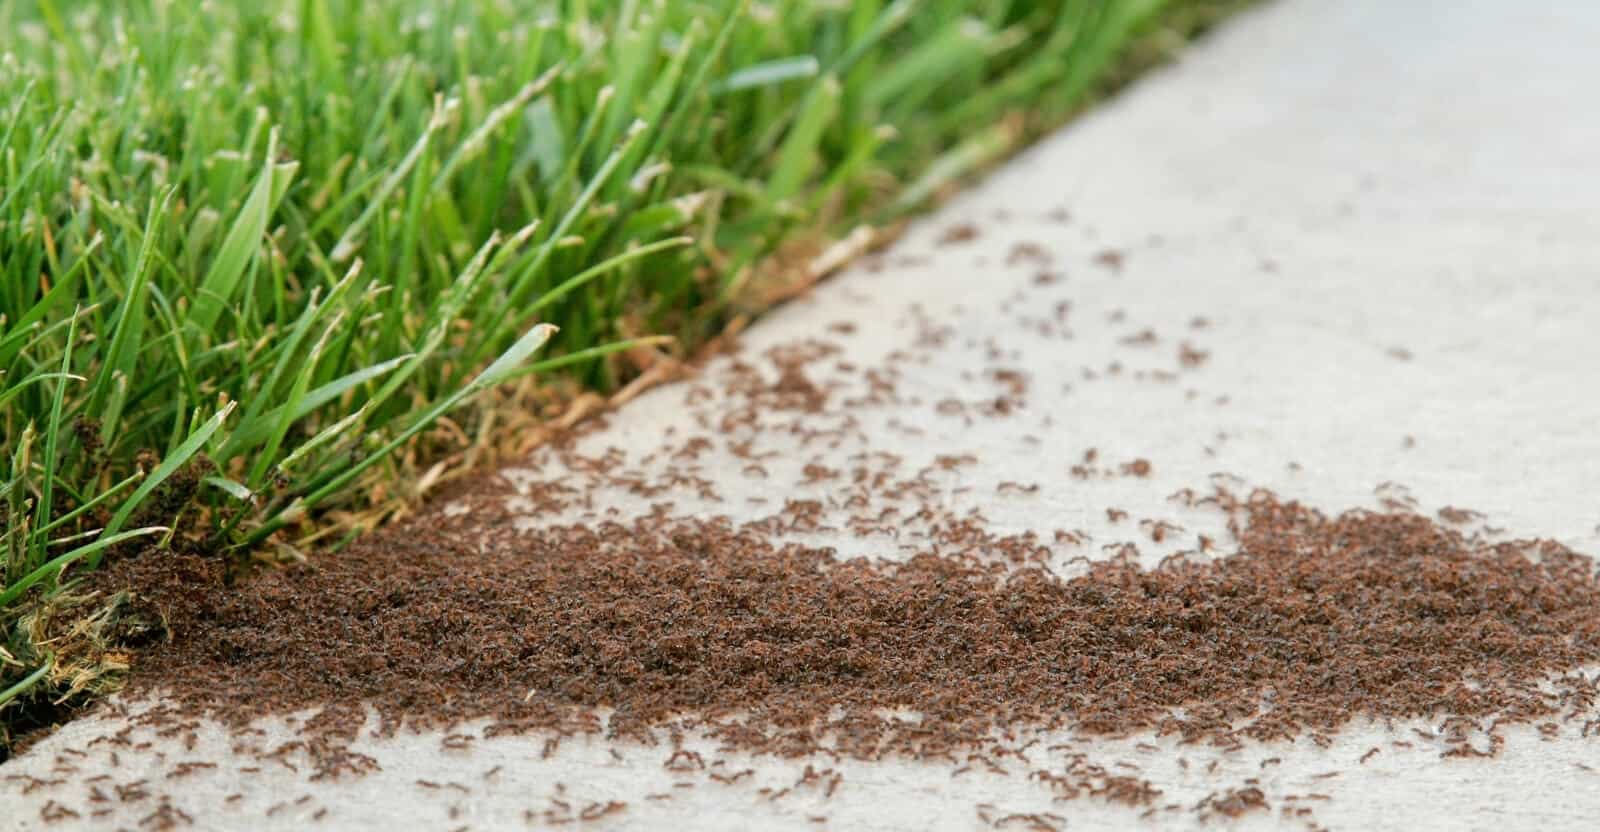 How to get rid of ants naturally